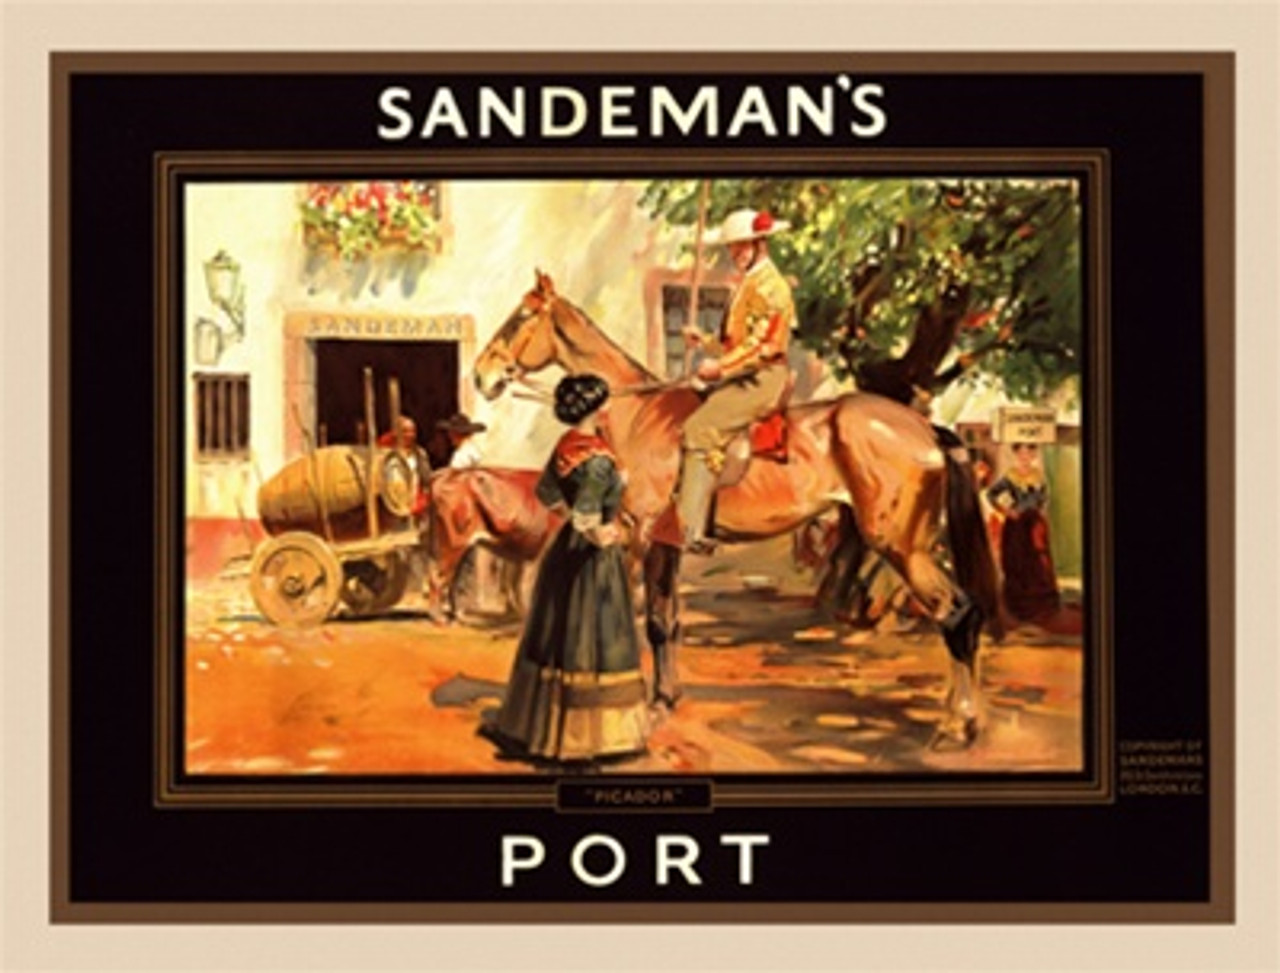 Sandeman's Port 1920 England Beautiful Vintage Poster Reproduction. English wine and spirits poster features a solder on a horse next to a woman in front of the Winery. Giclee Advertising Prints. Classic Posters